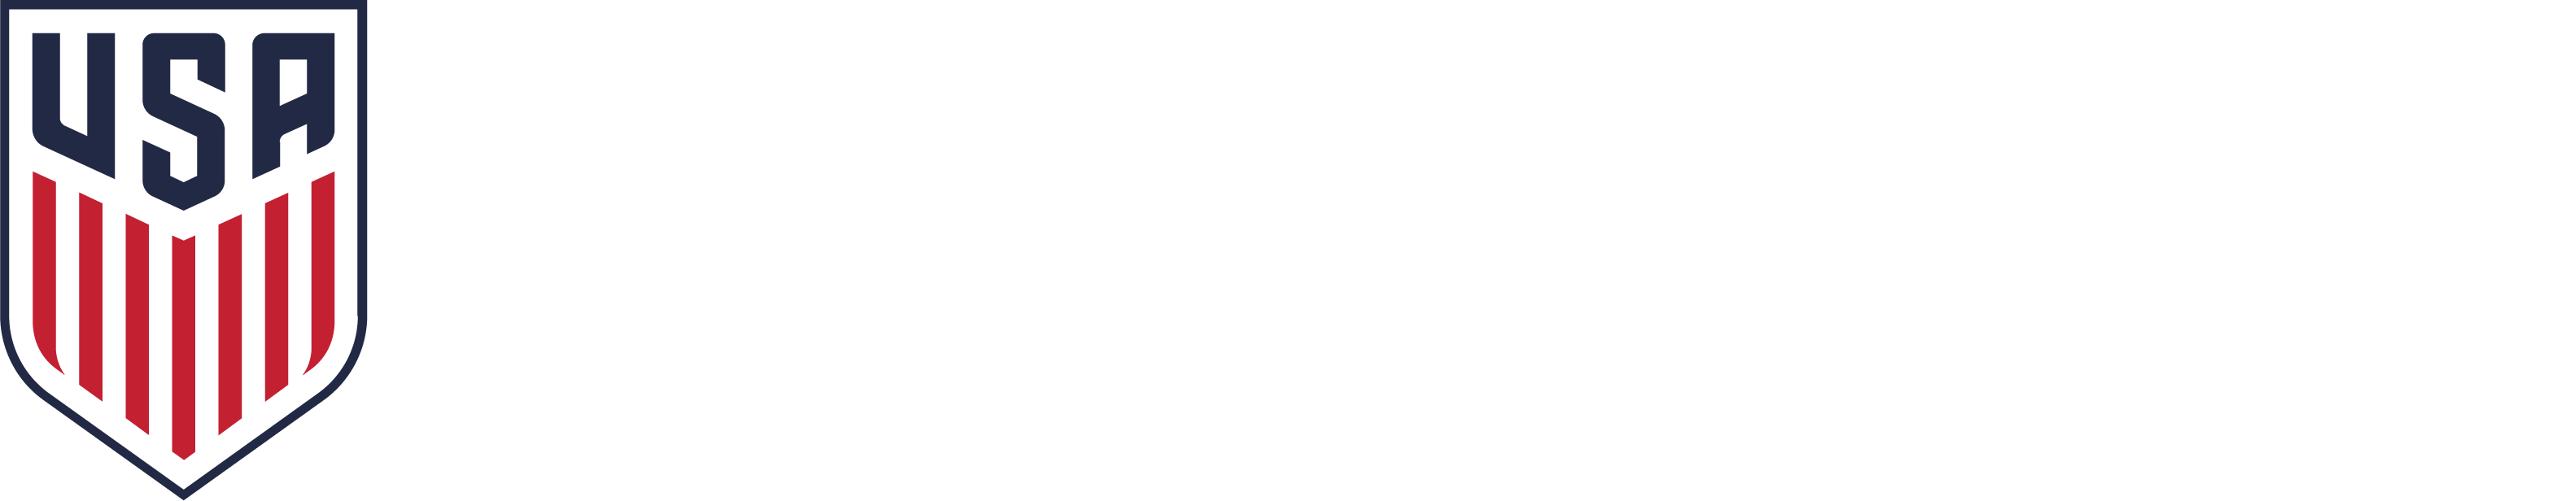 us soccer connect